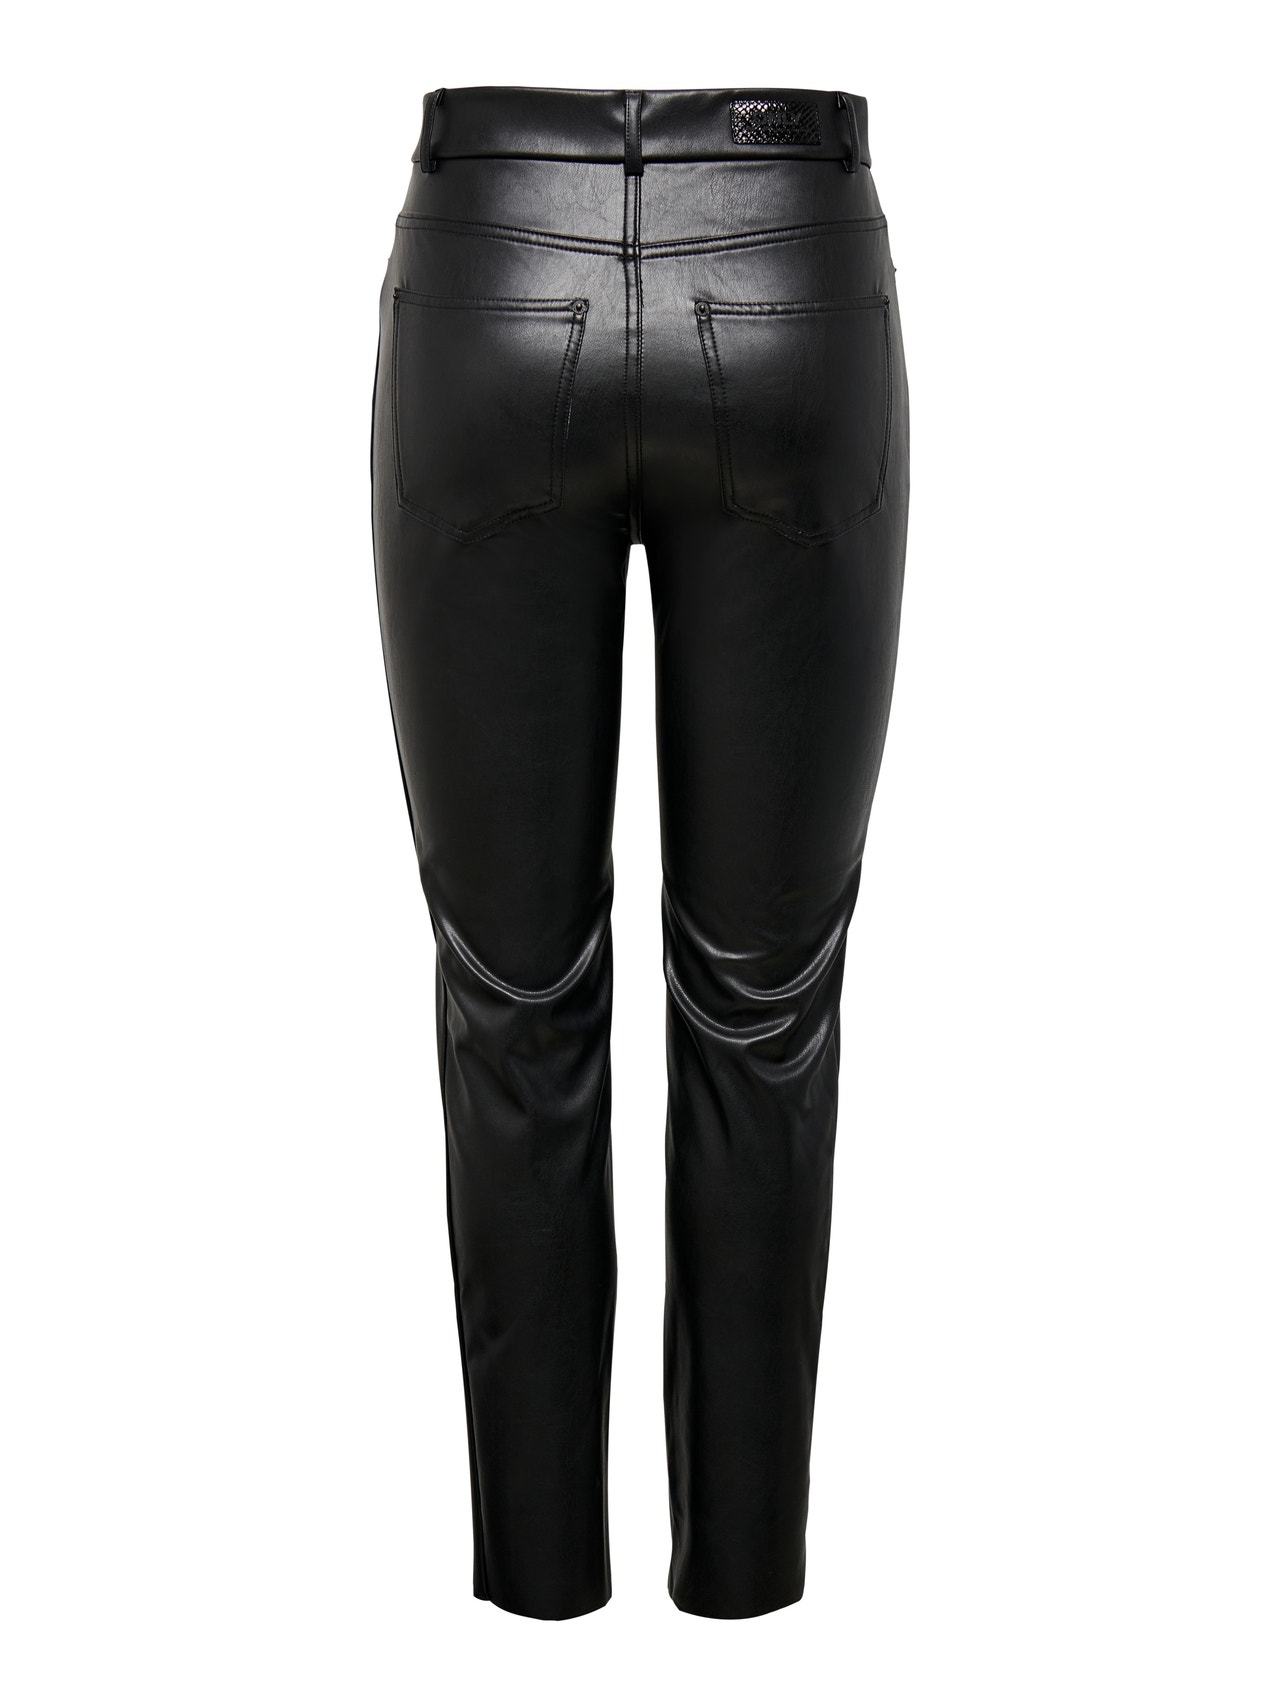 YWDJ Faux Leather Pants for Women Tummy Control Fashion Solid Zipper Casual  Mid Waist Leather Long PantsBlackL 